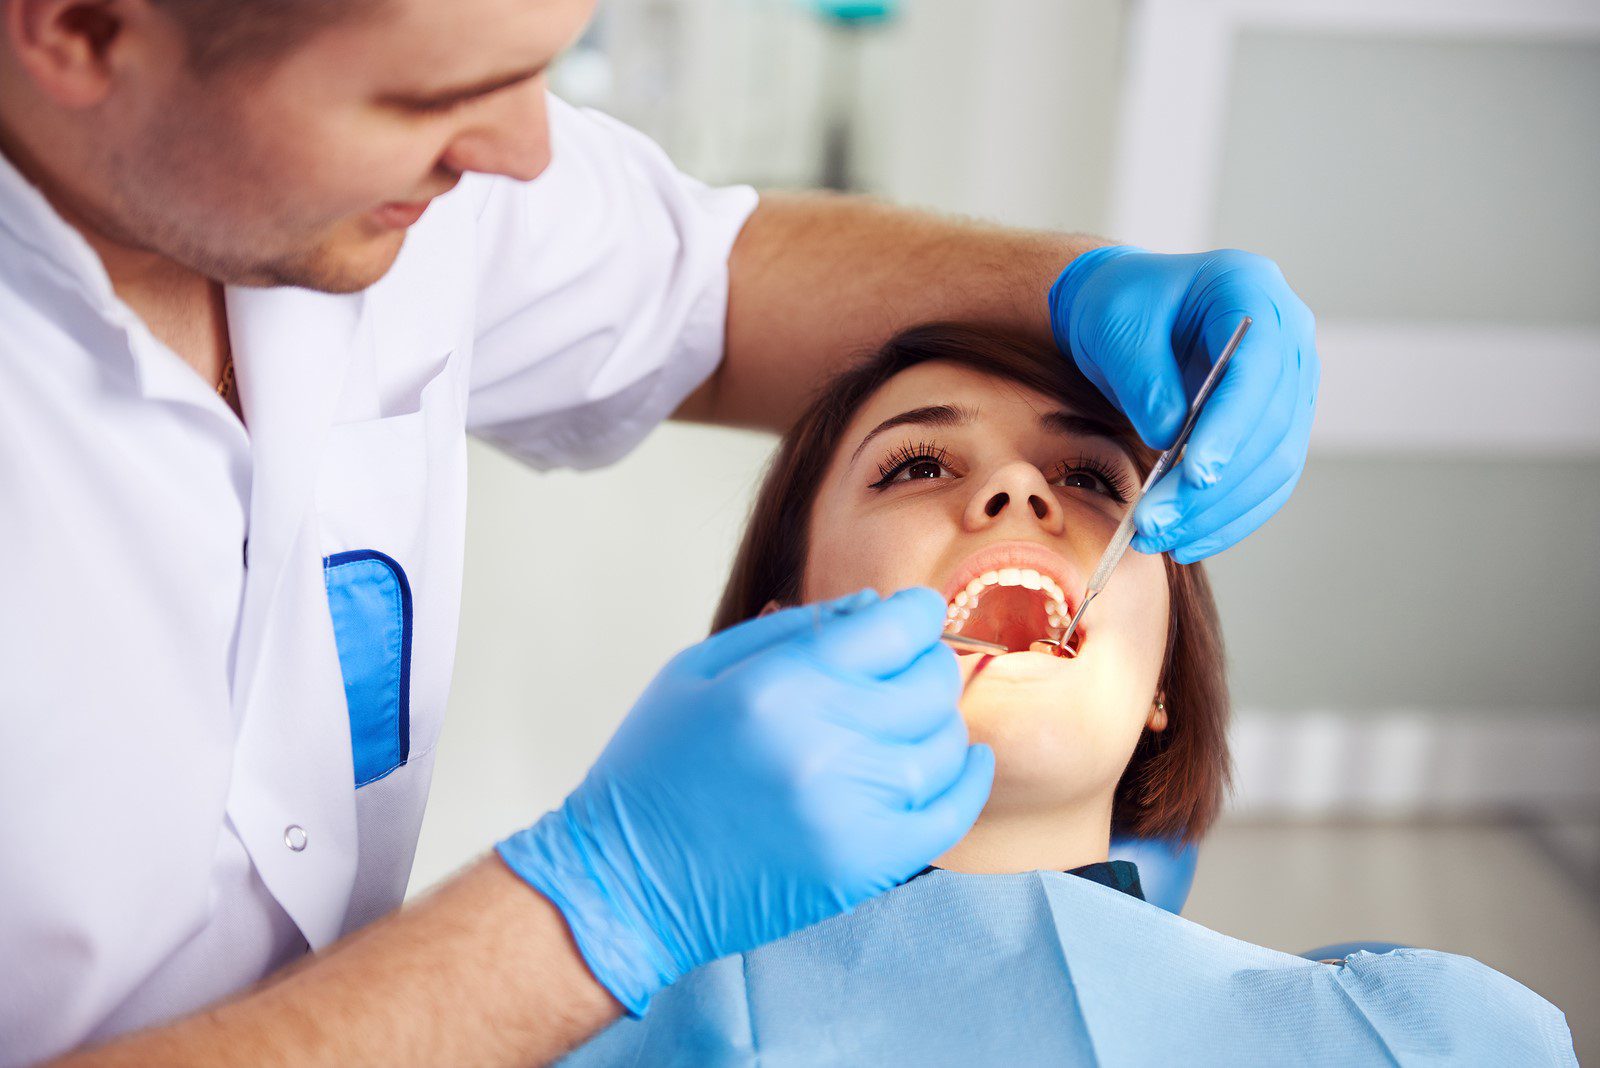 Things You Need to Know About Wisdom Teeth Removal